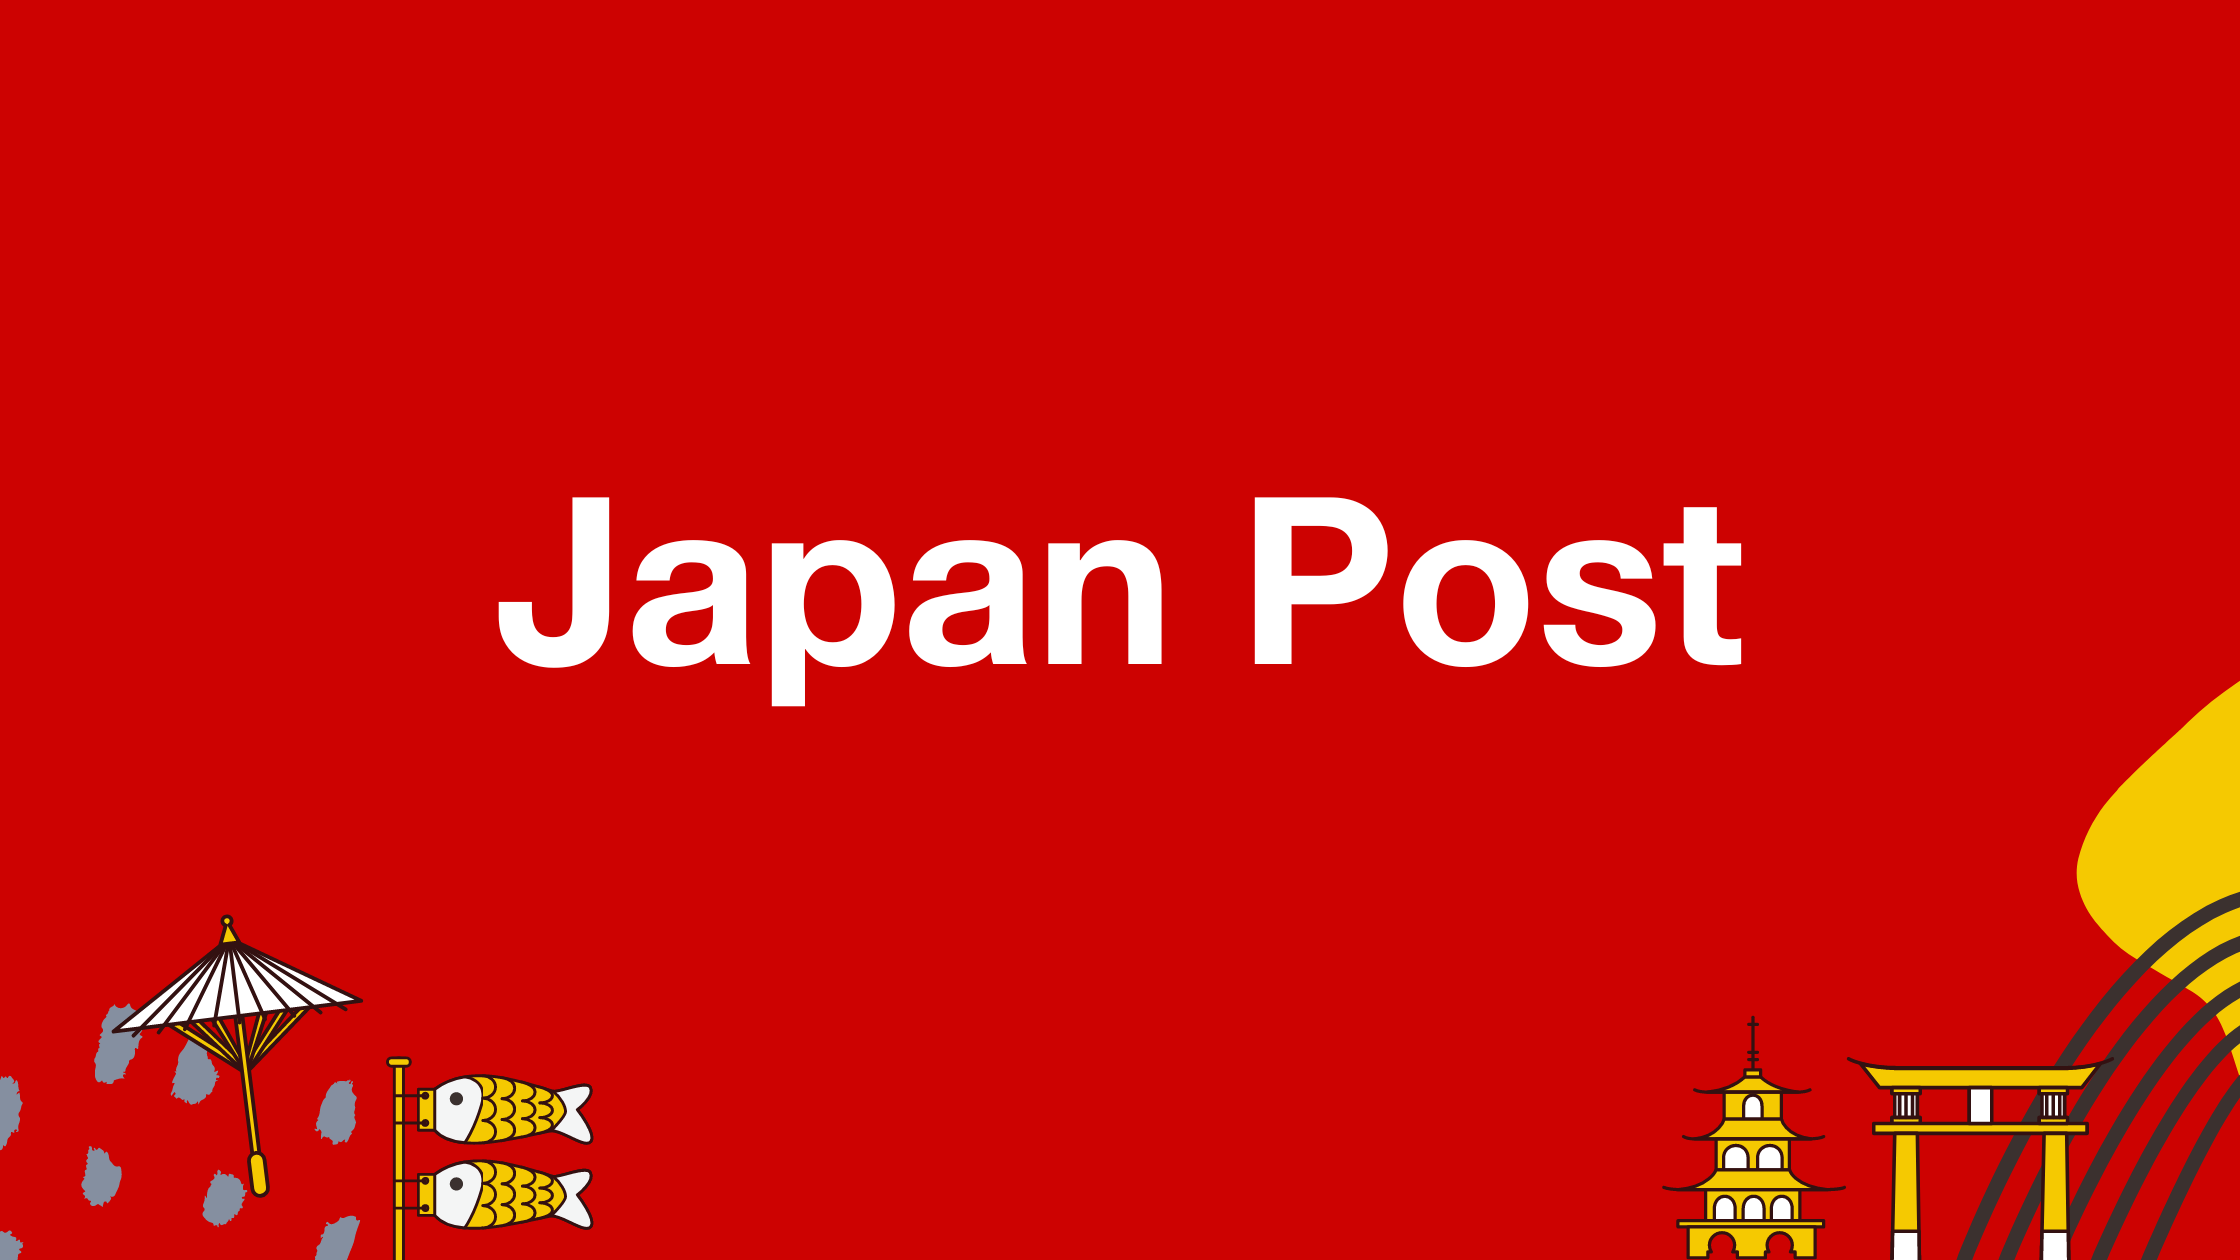 Shipping in Japan 201: Shipping with Japan Post